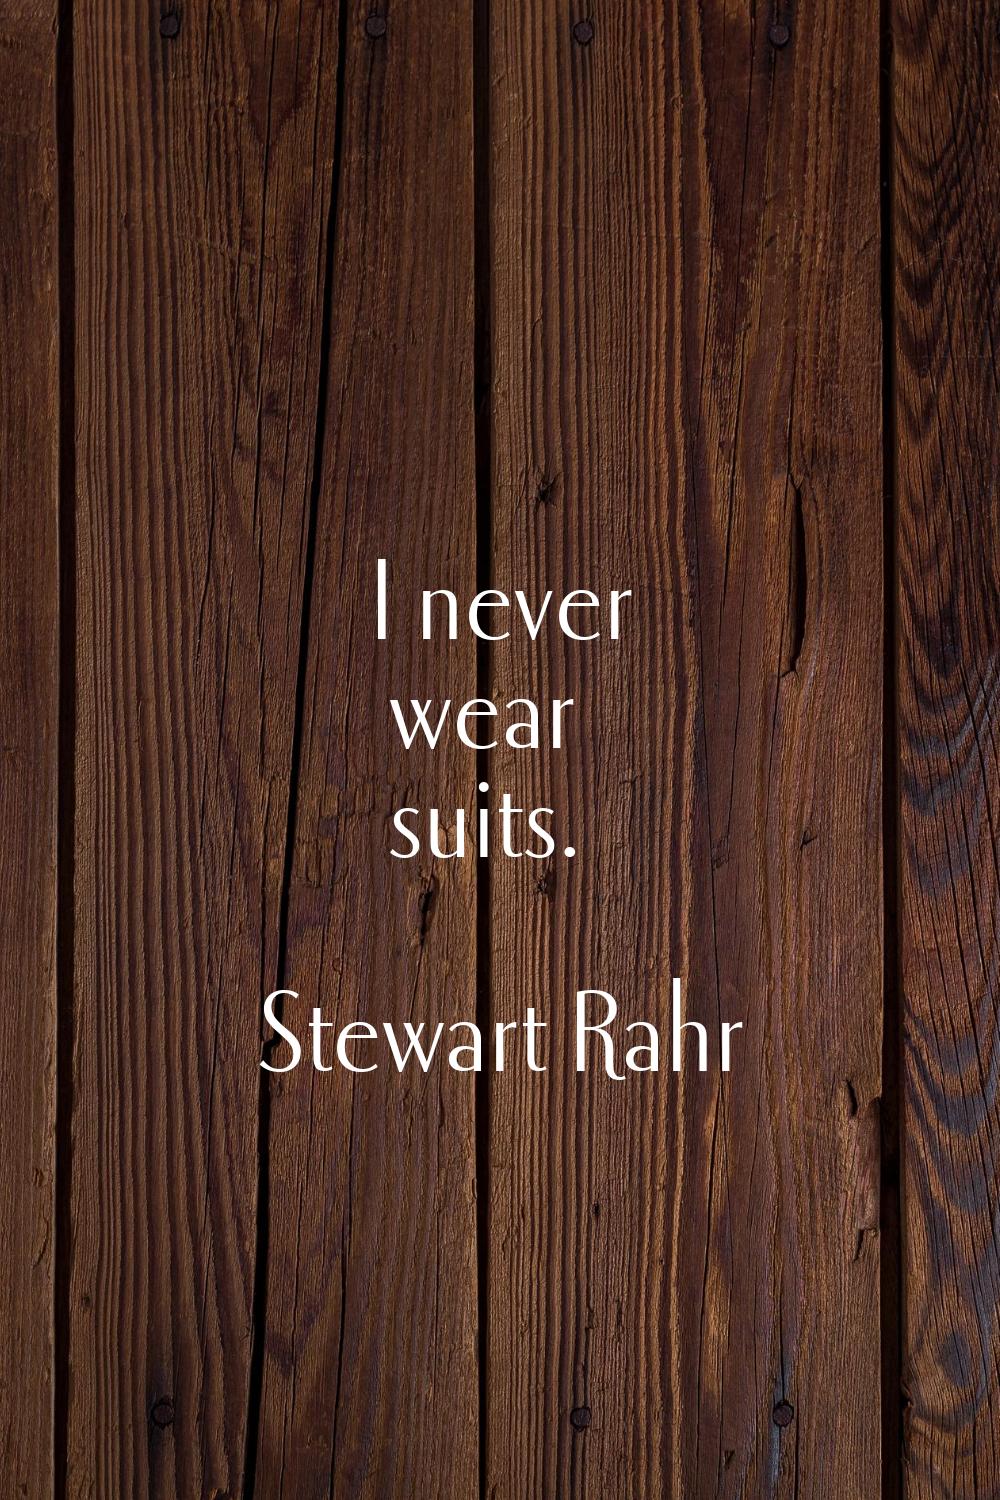 I never wear suits.